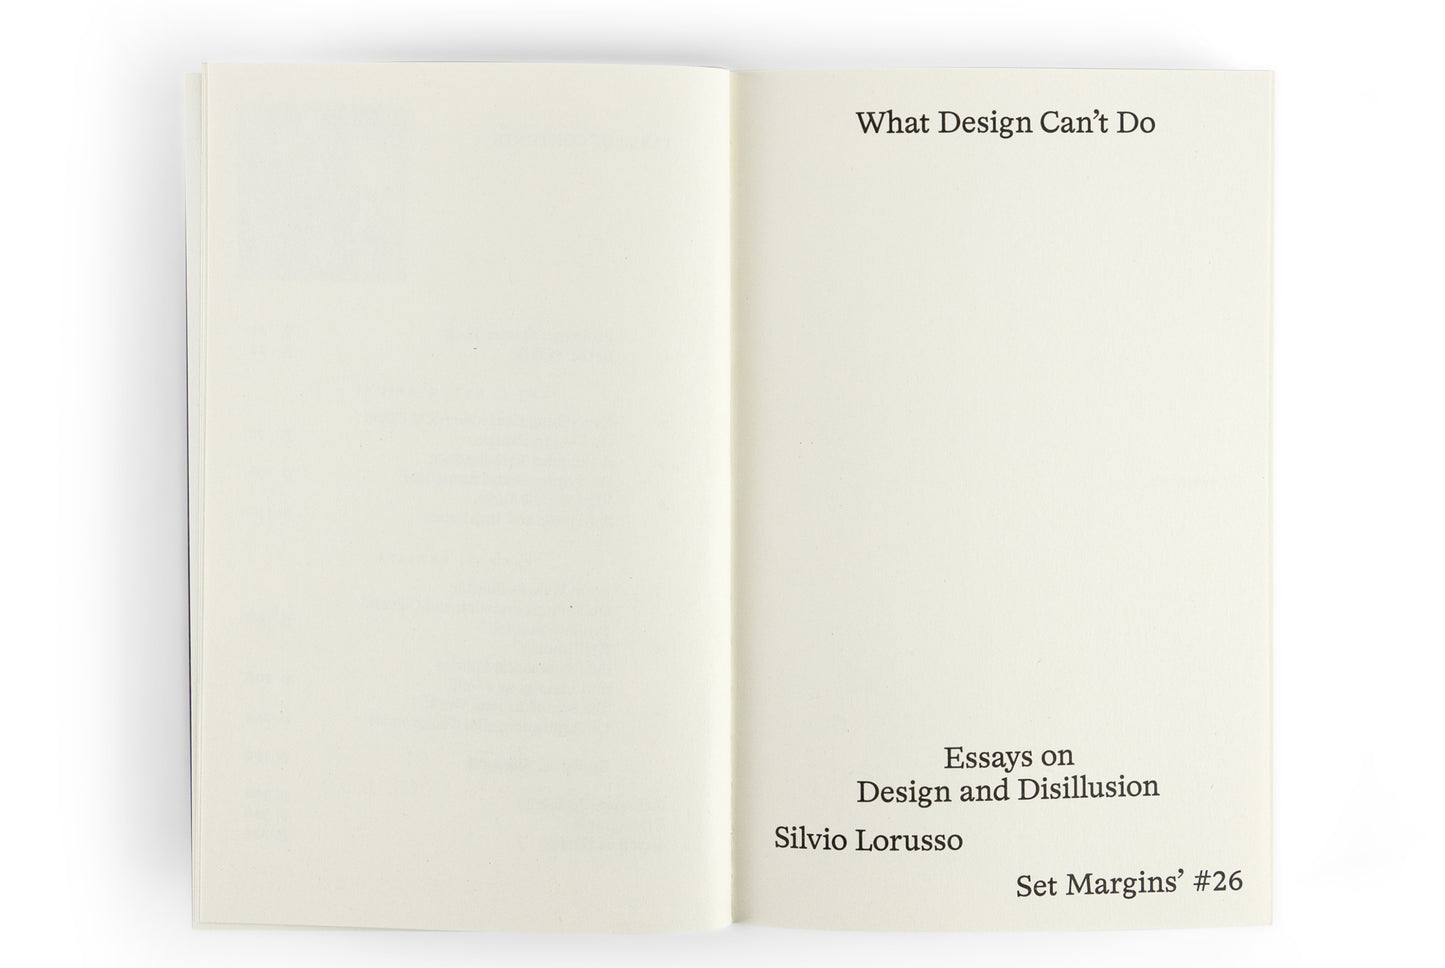 What Design Can't Do - Essays on Design and Disillusion